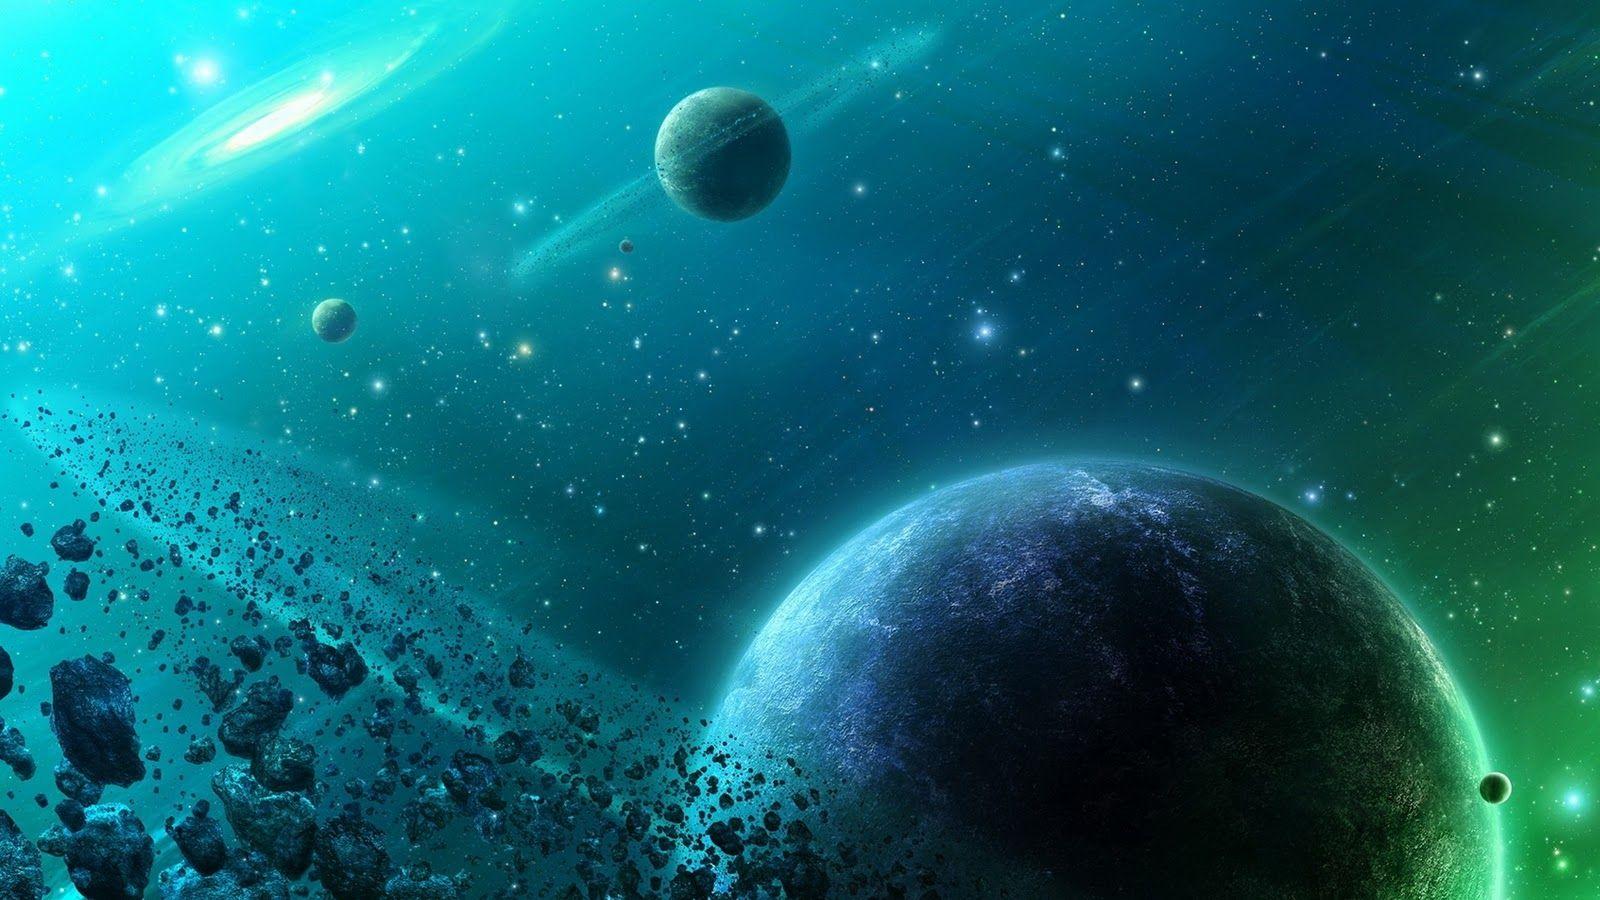 Space Galaxy Live Wallpaper  Apps on Google Play